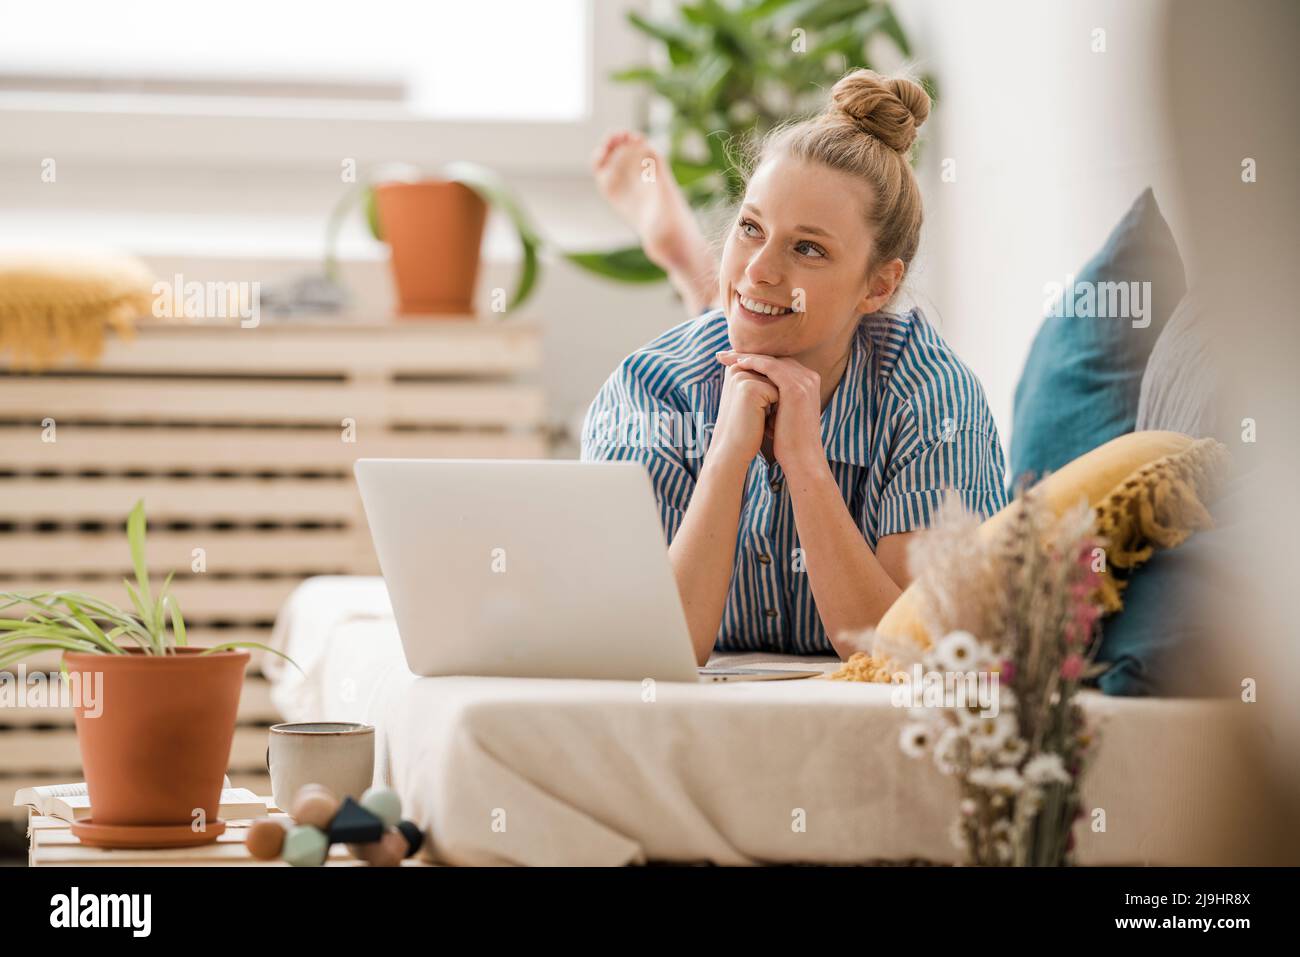 Freelancer with hand on chin day dreaming lying on bed at home Stock Photo